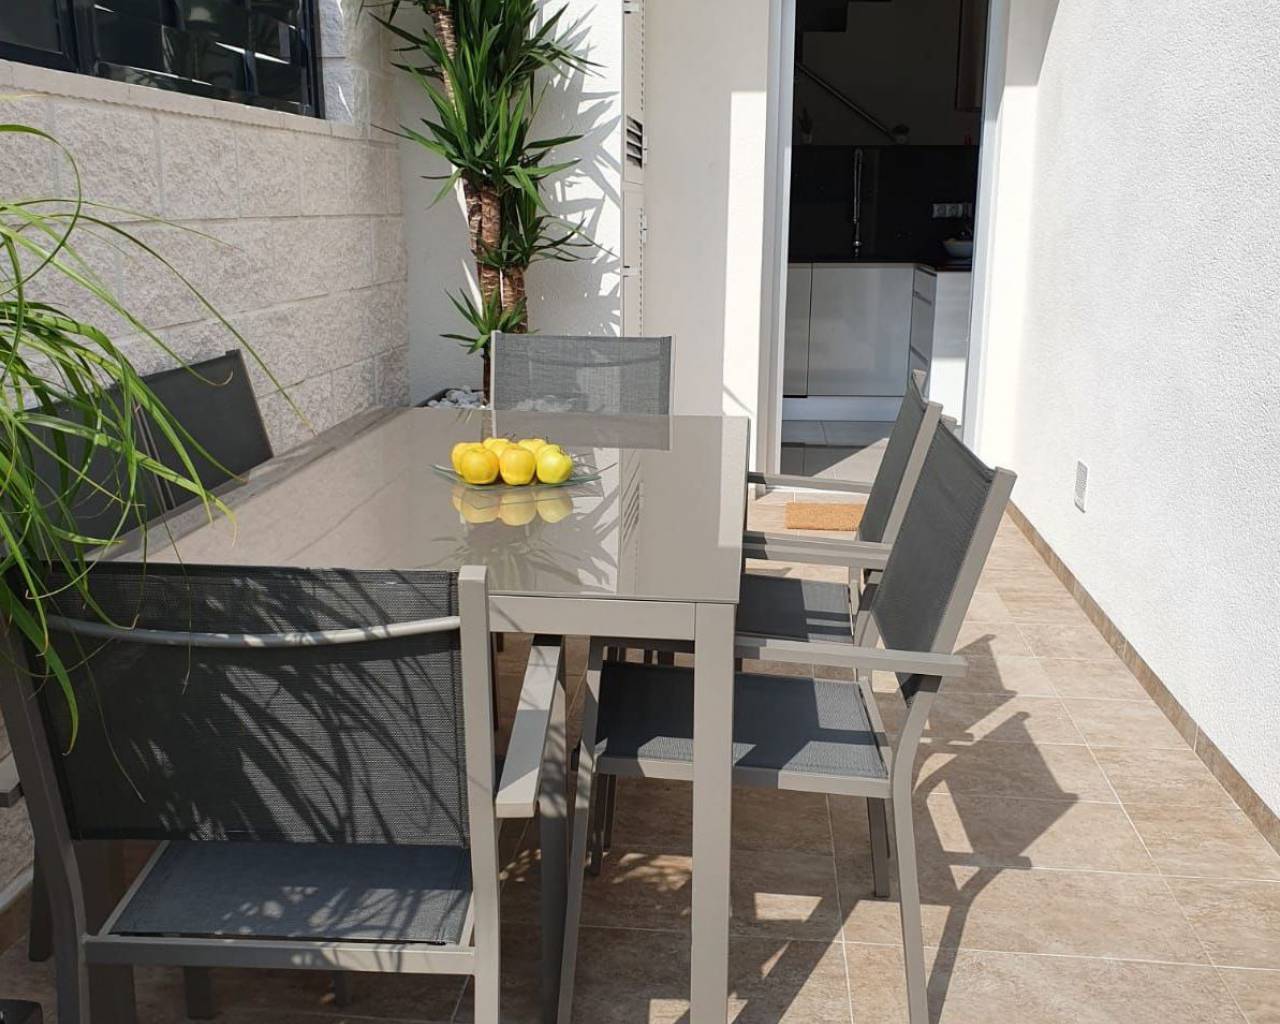 outside table on terrace of new villas for sale from zebra homes real estate